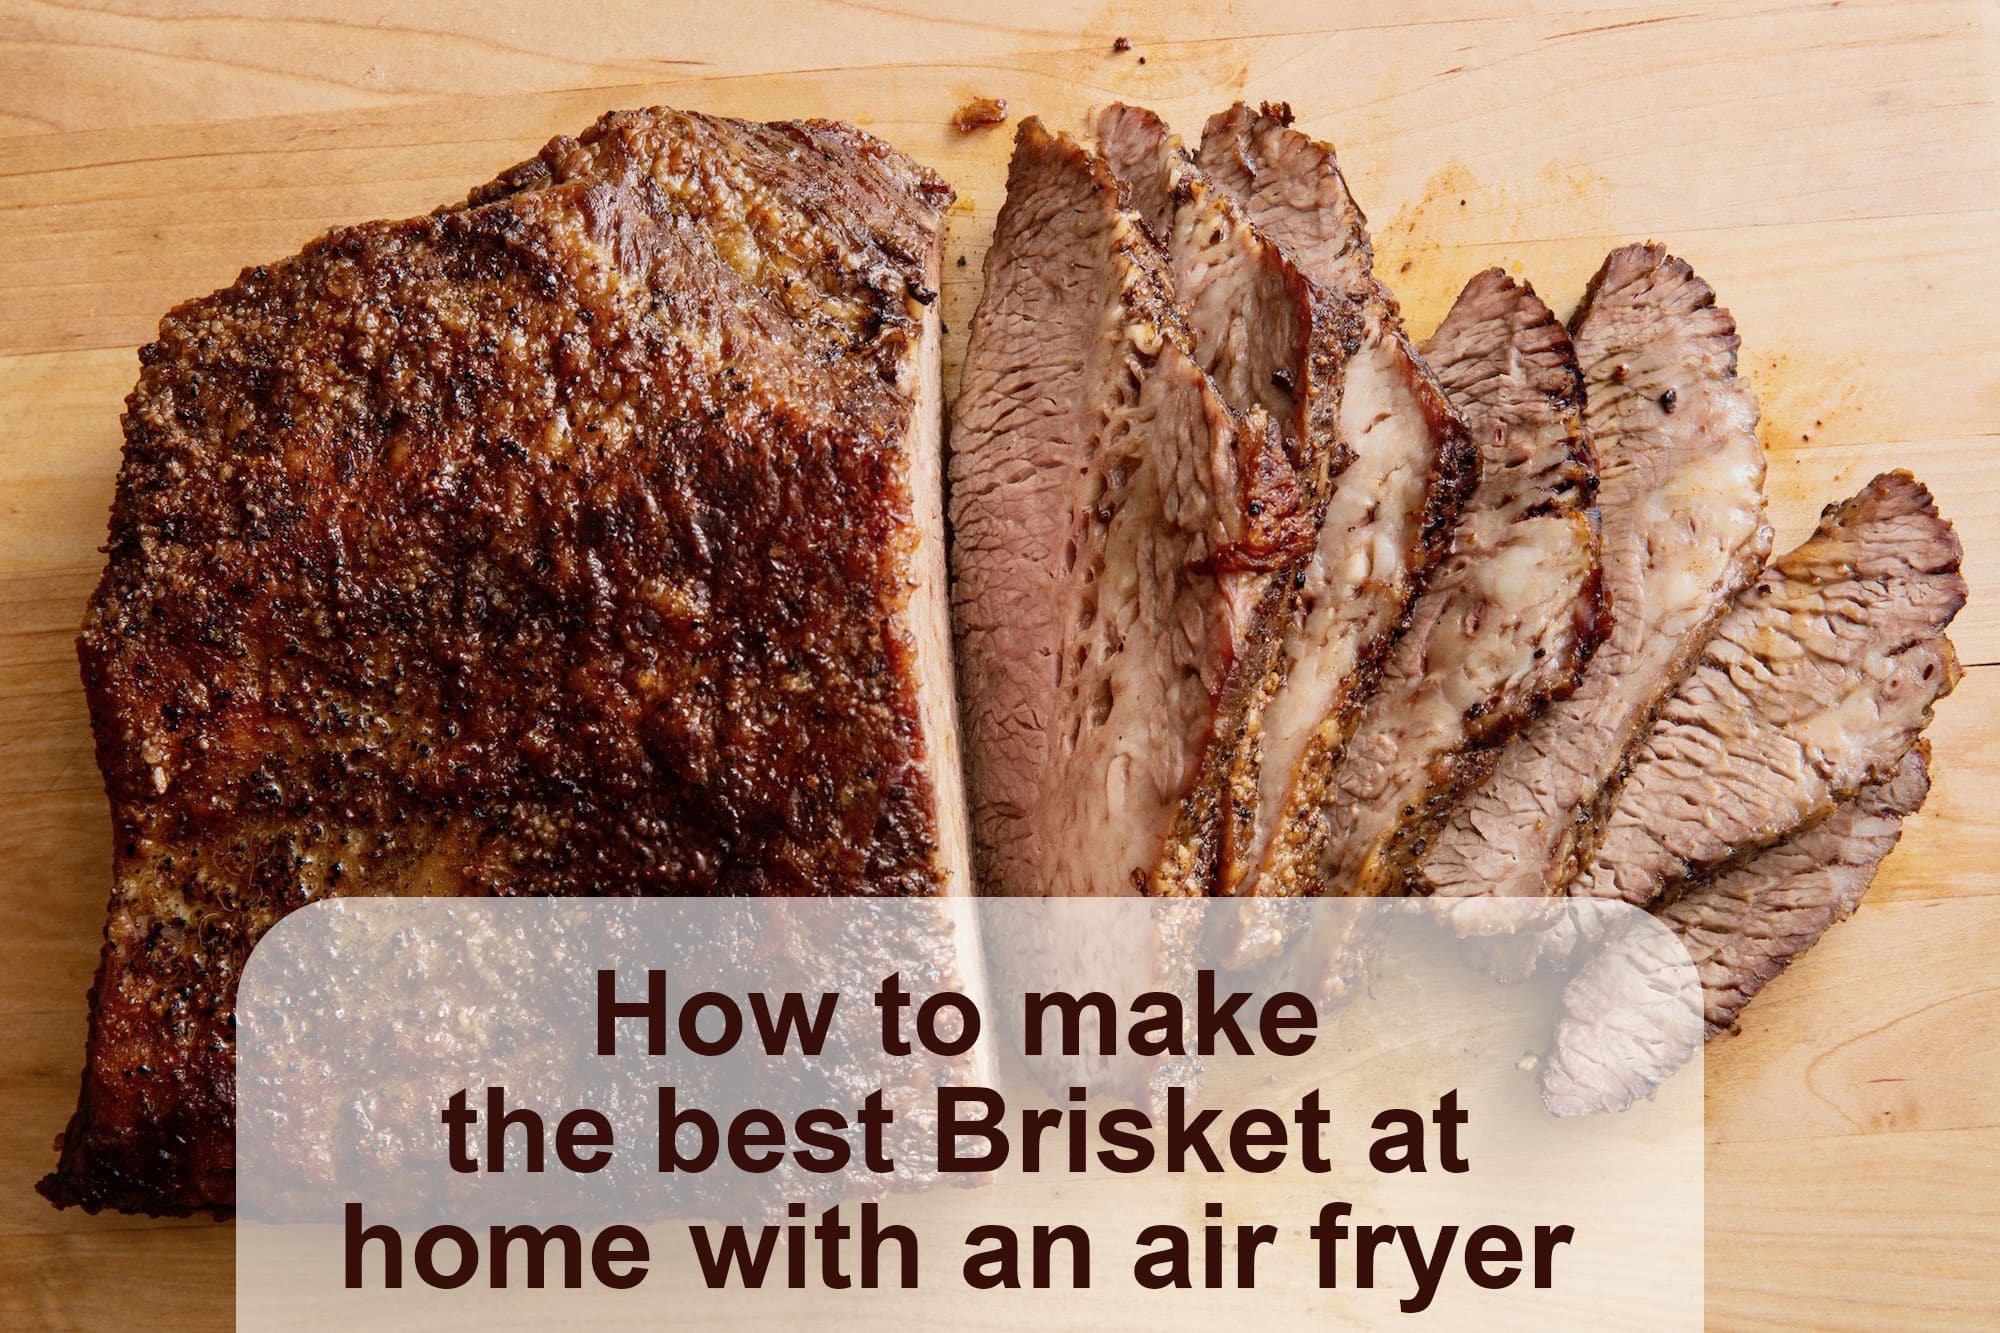 How to make the best Brisket at home with an air fryer